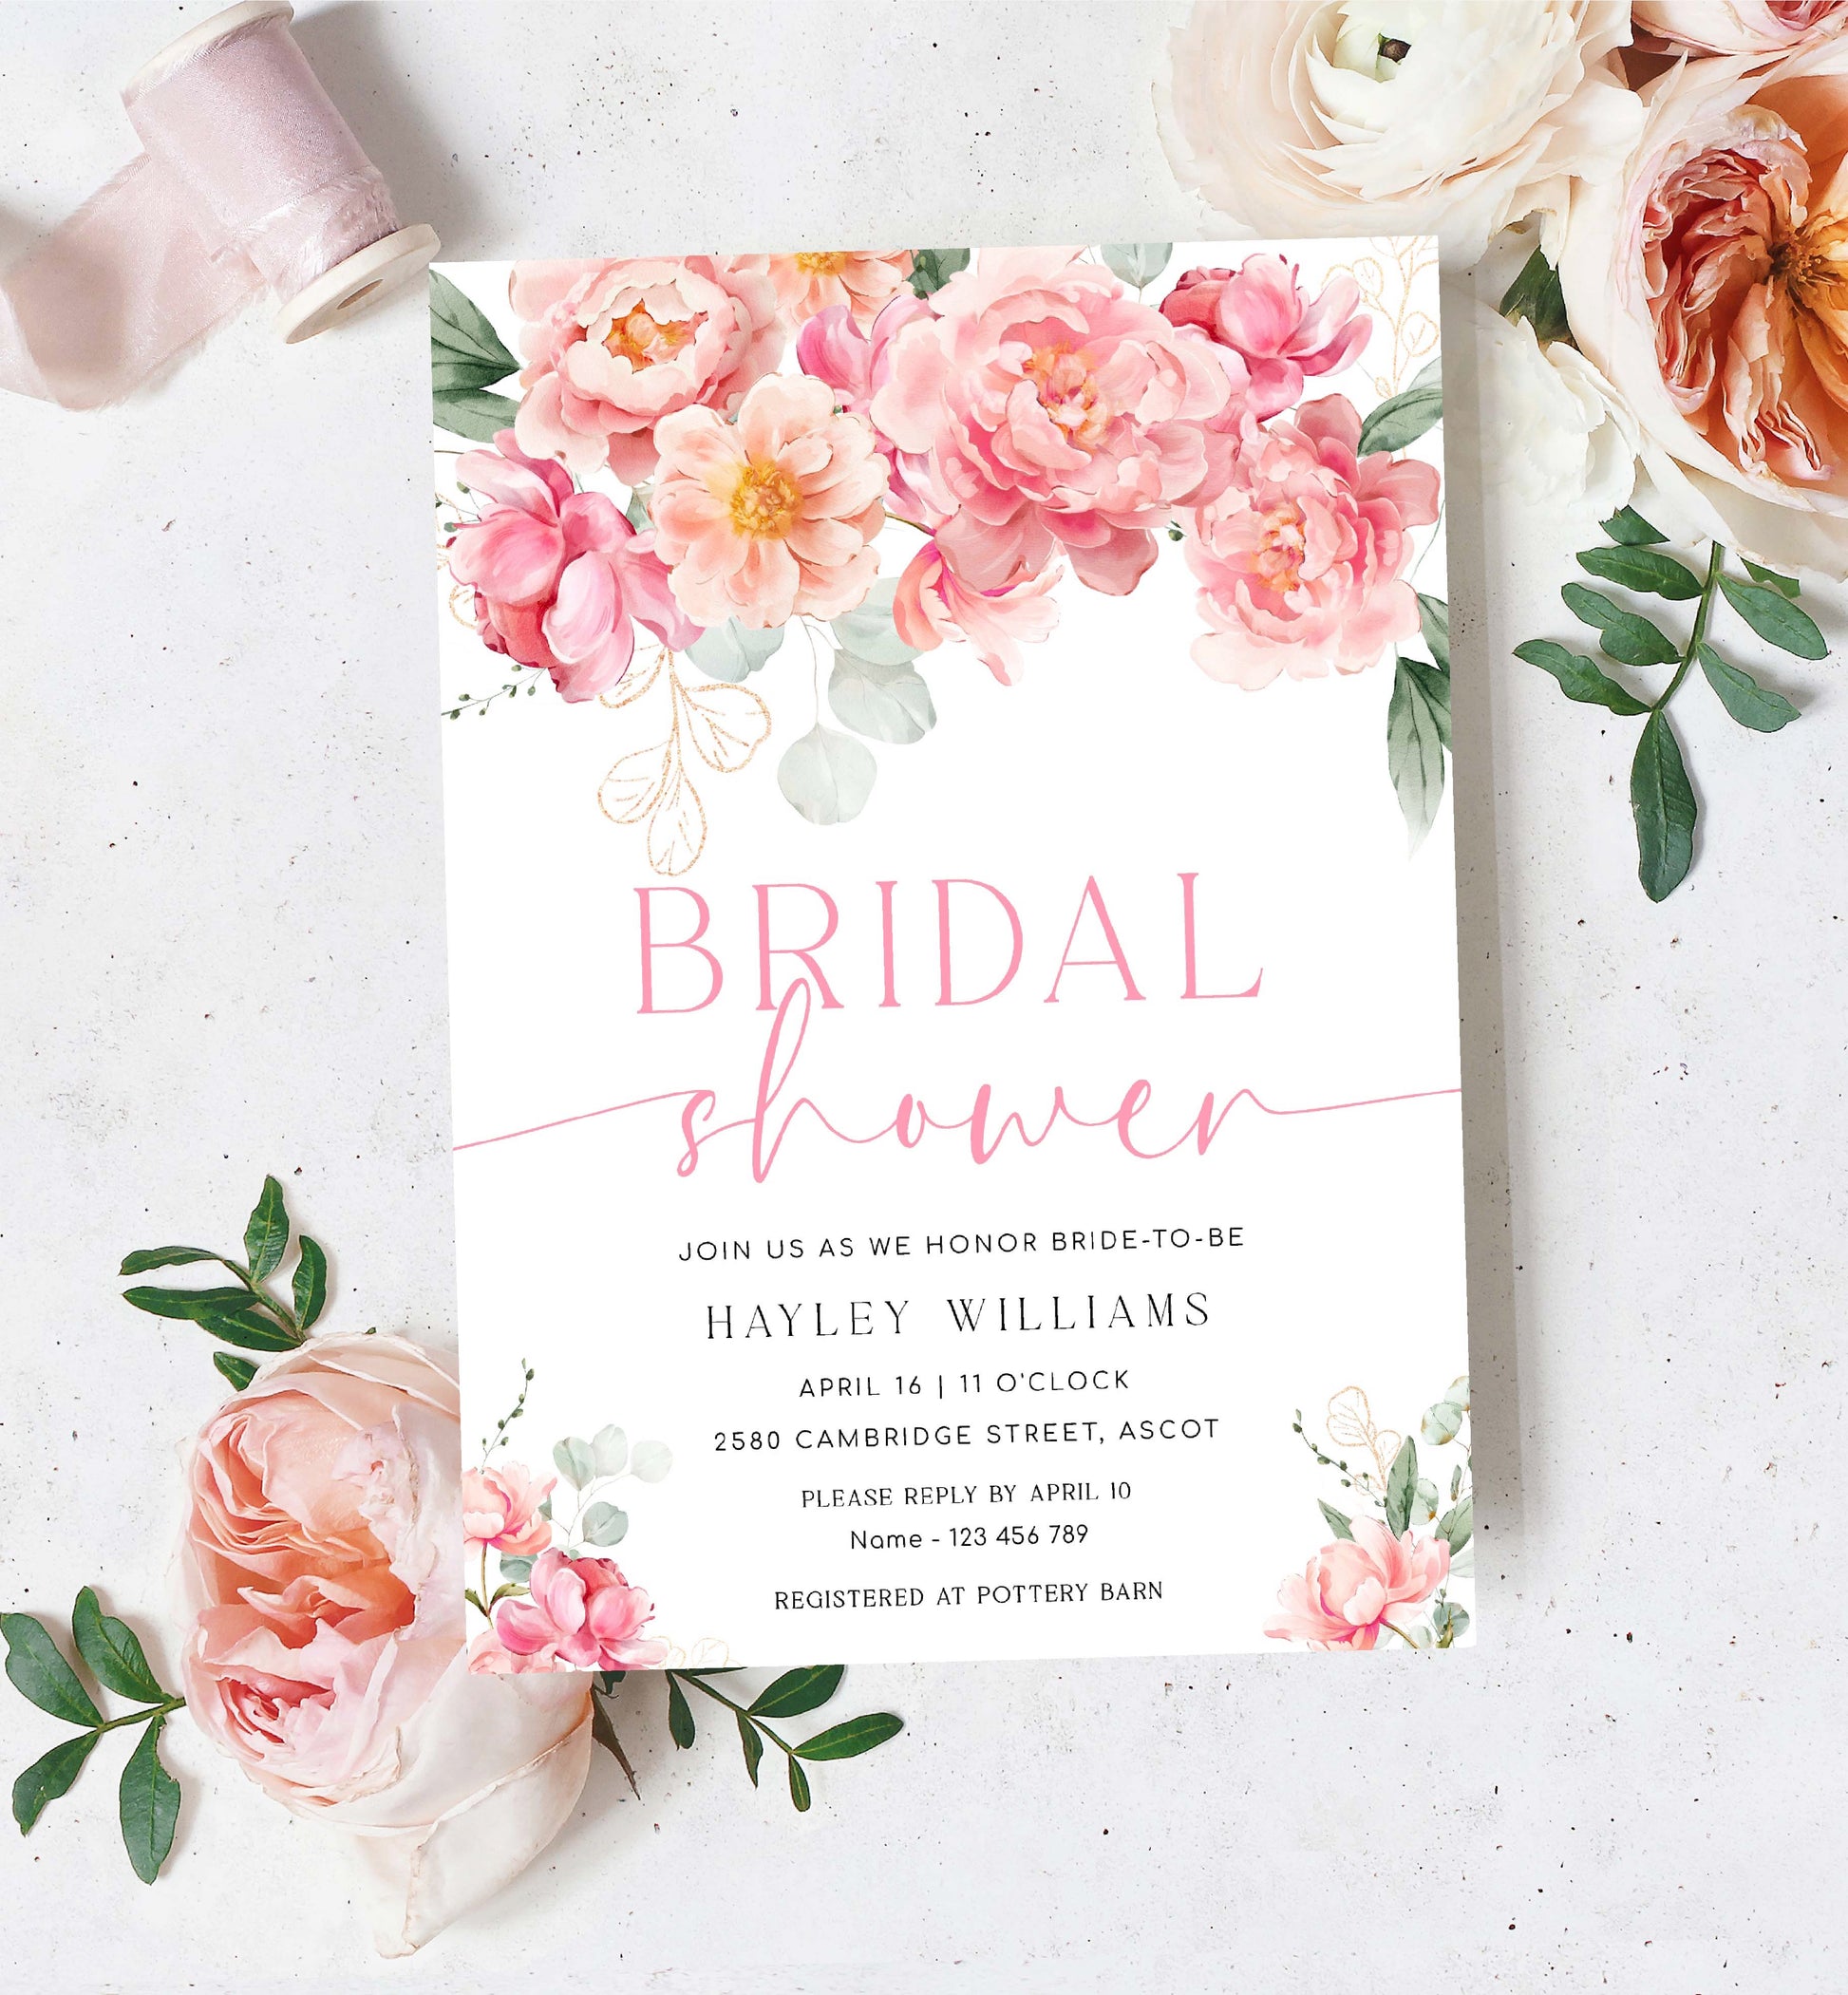 Peony Bridal Shower Invitation Suite, Finer Details, Thank You Card, Printable Hot Pink Blush Peony Floral Bridal Shower Invite, Piper